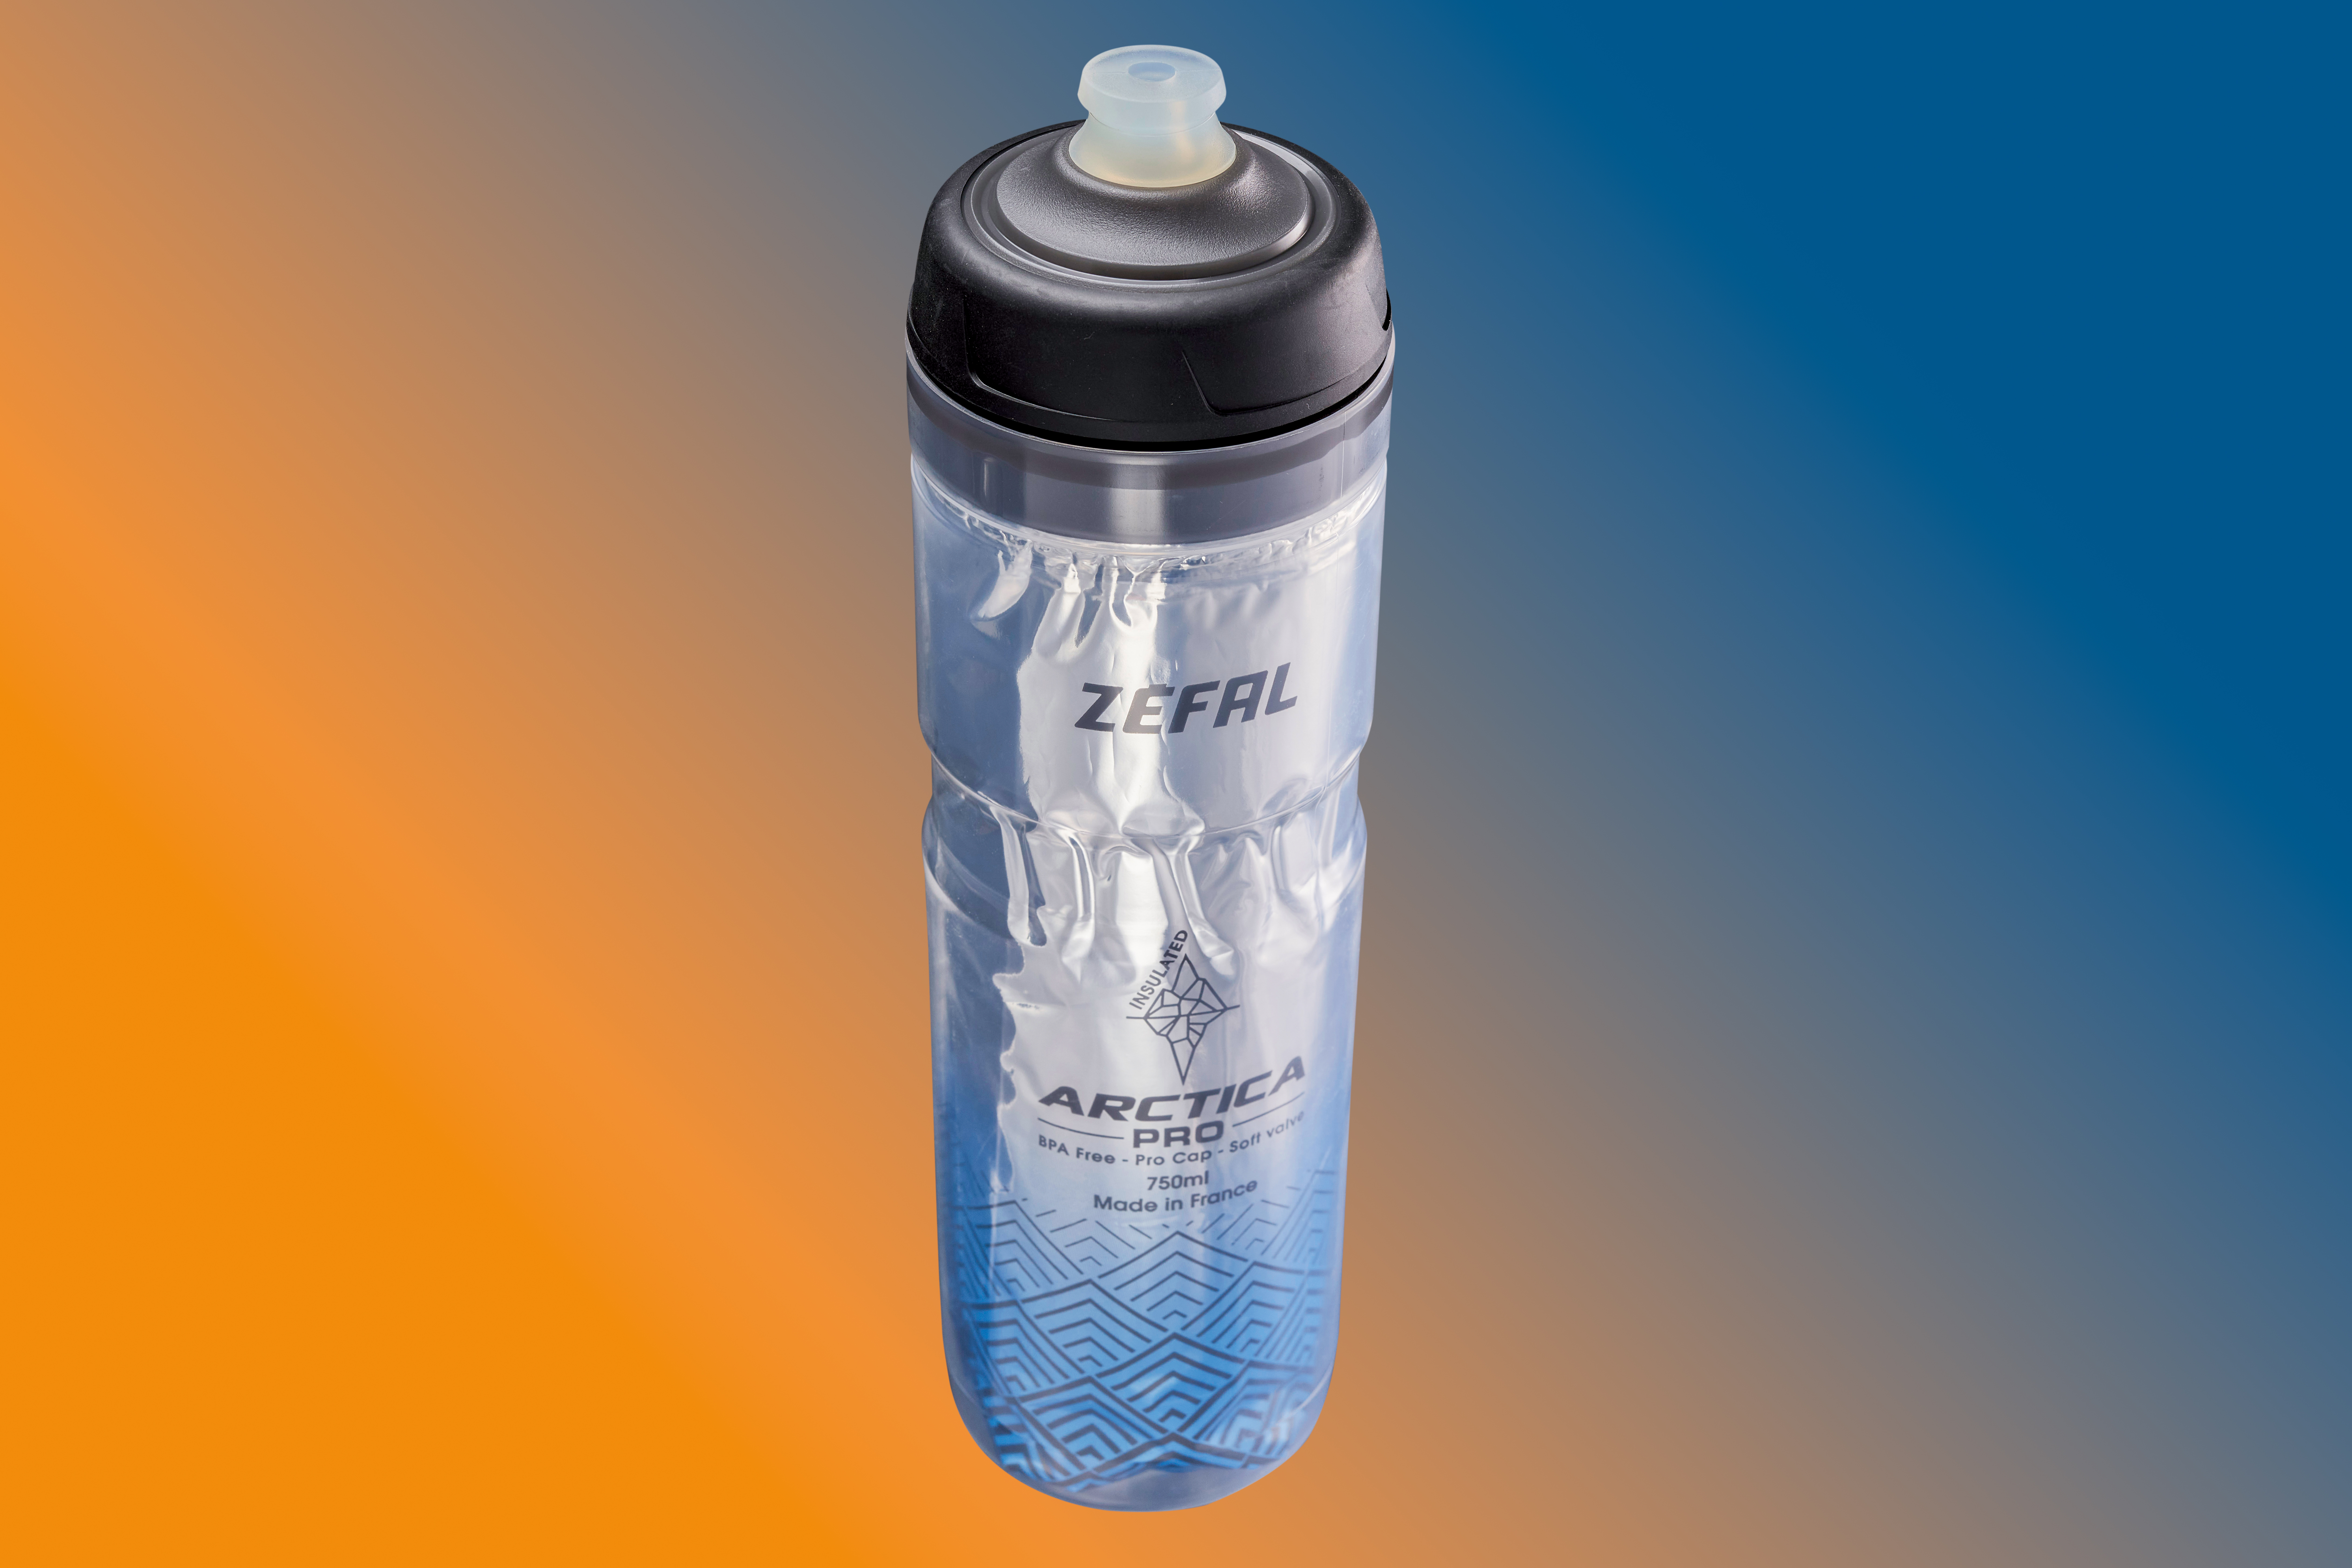 Pro-Squeeze Water Bottle